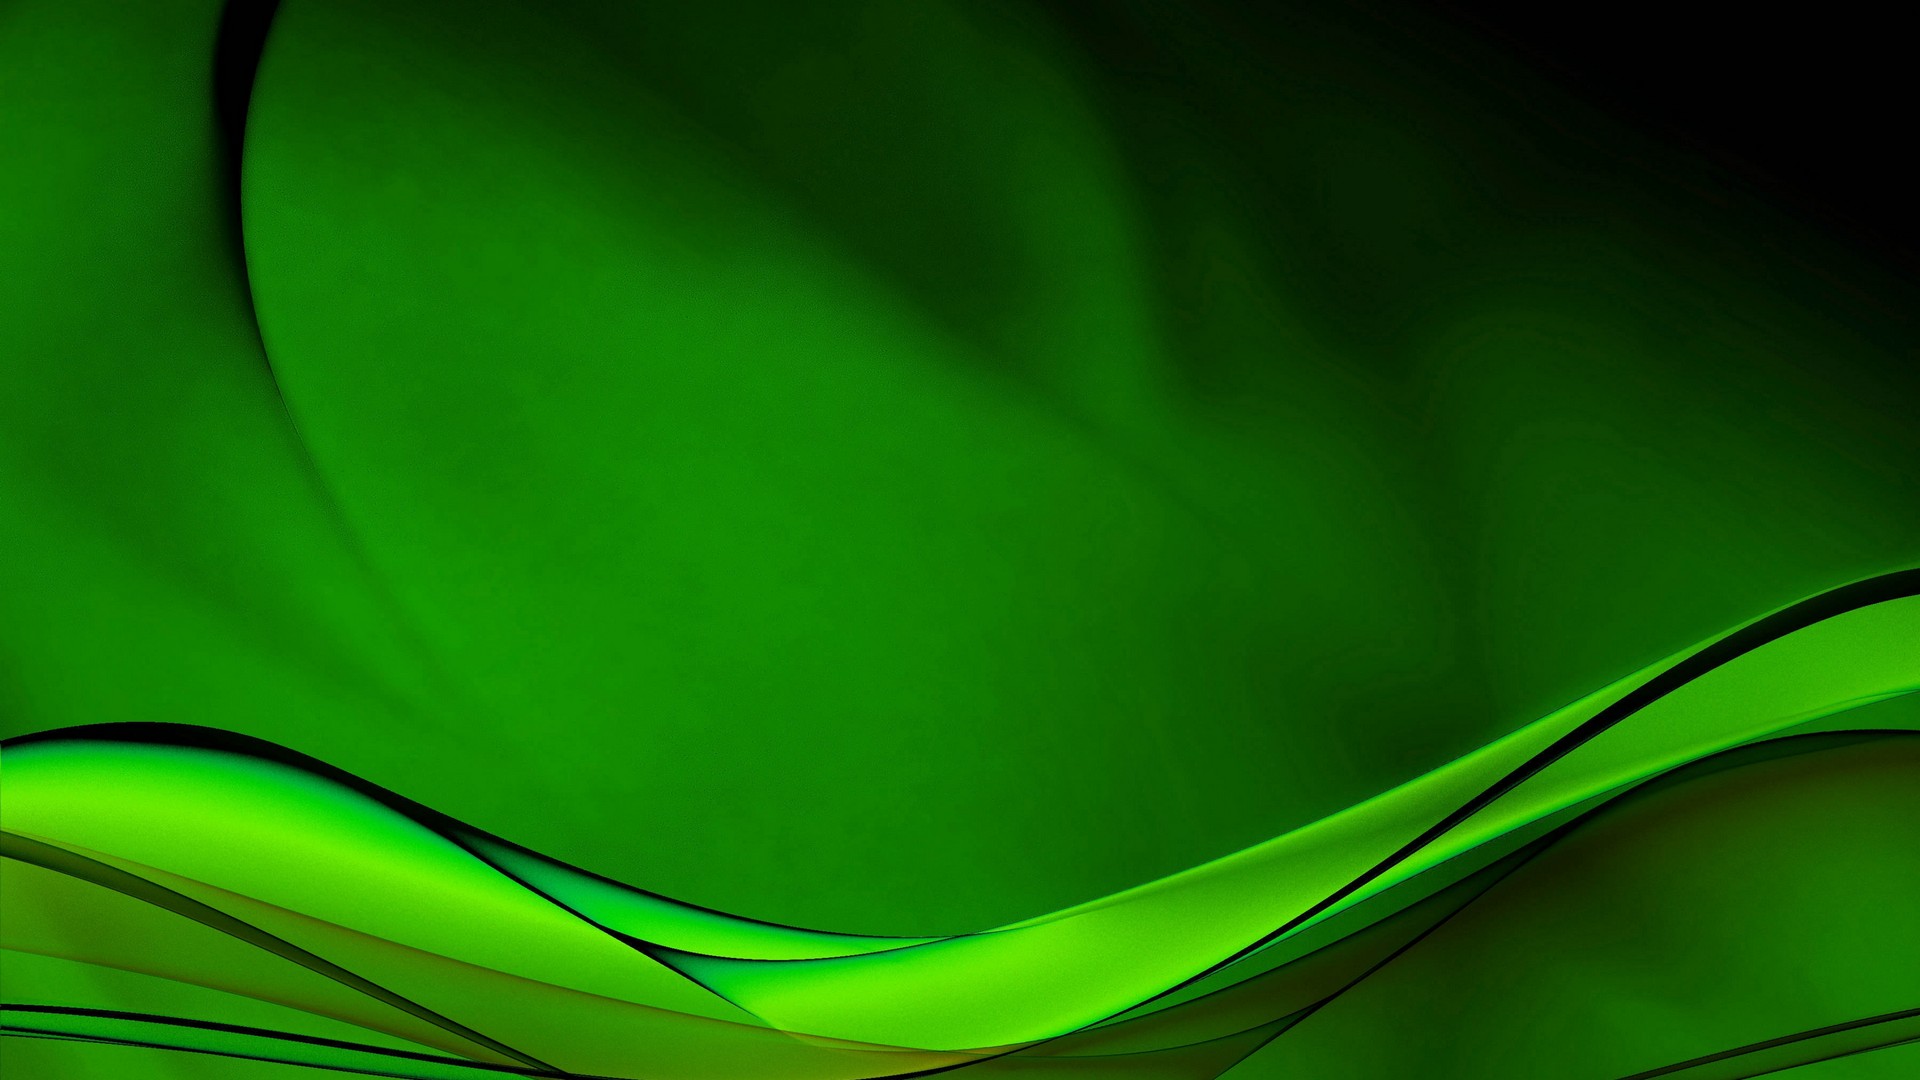 Neon Green HD Wallpaper with image resolution 1920x1080 pixel. You can make this wallpaper for your Desktop Computer Backgrounds, Mac Wallpapers, Android Lock screen or iPhone Screensavers